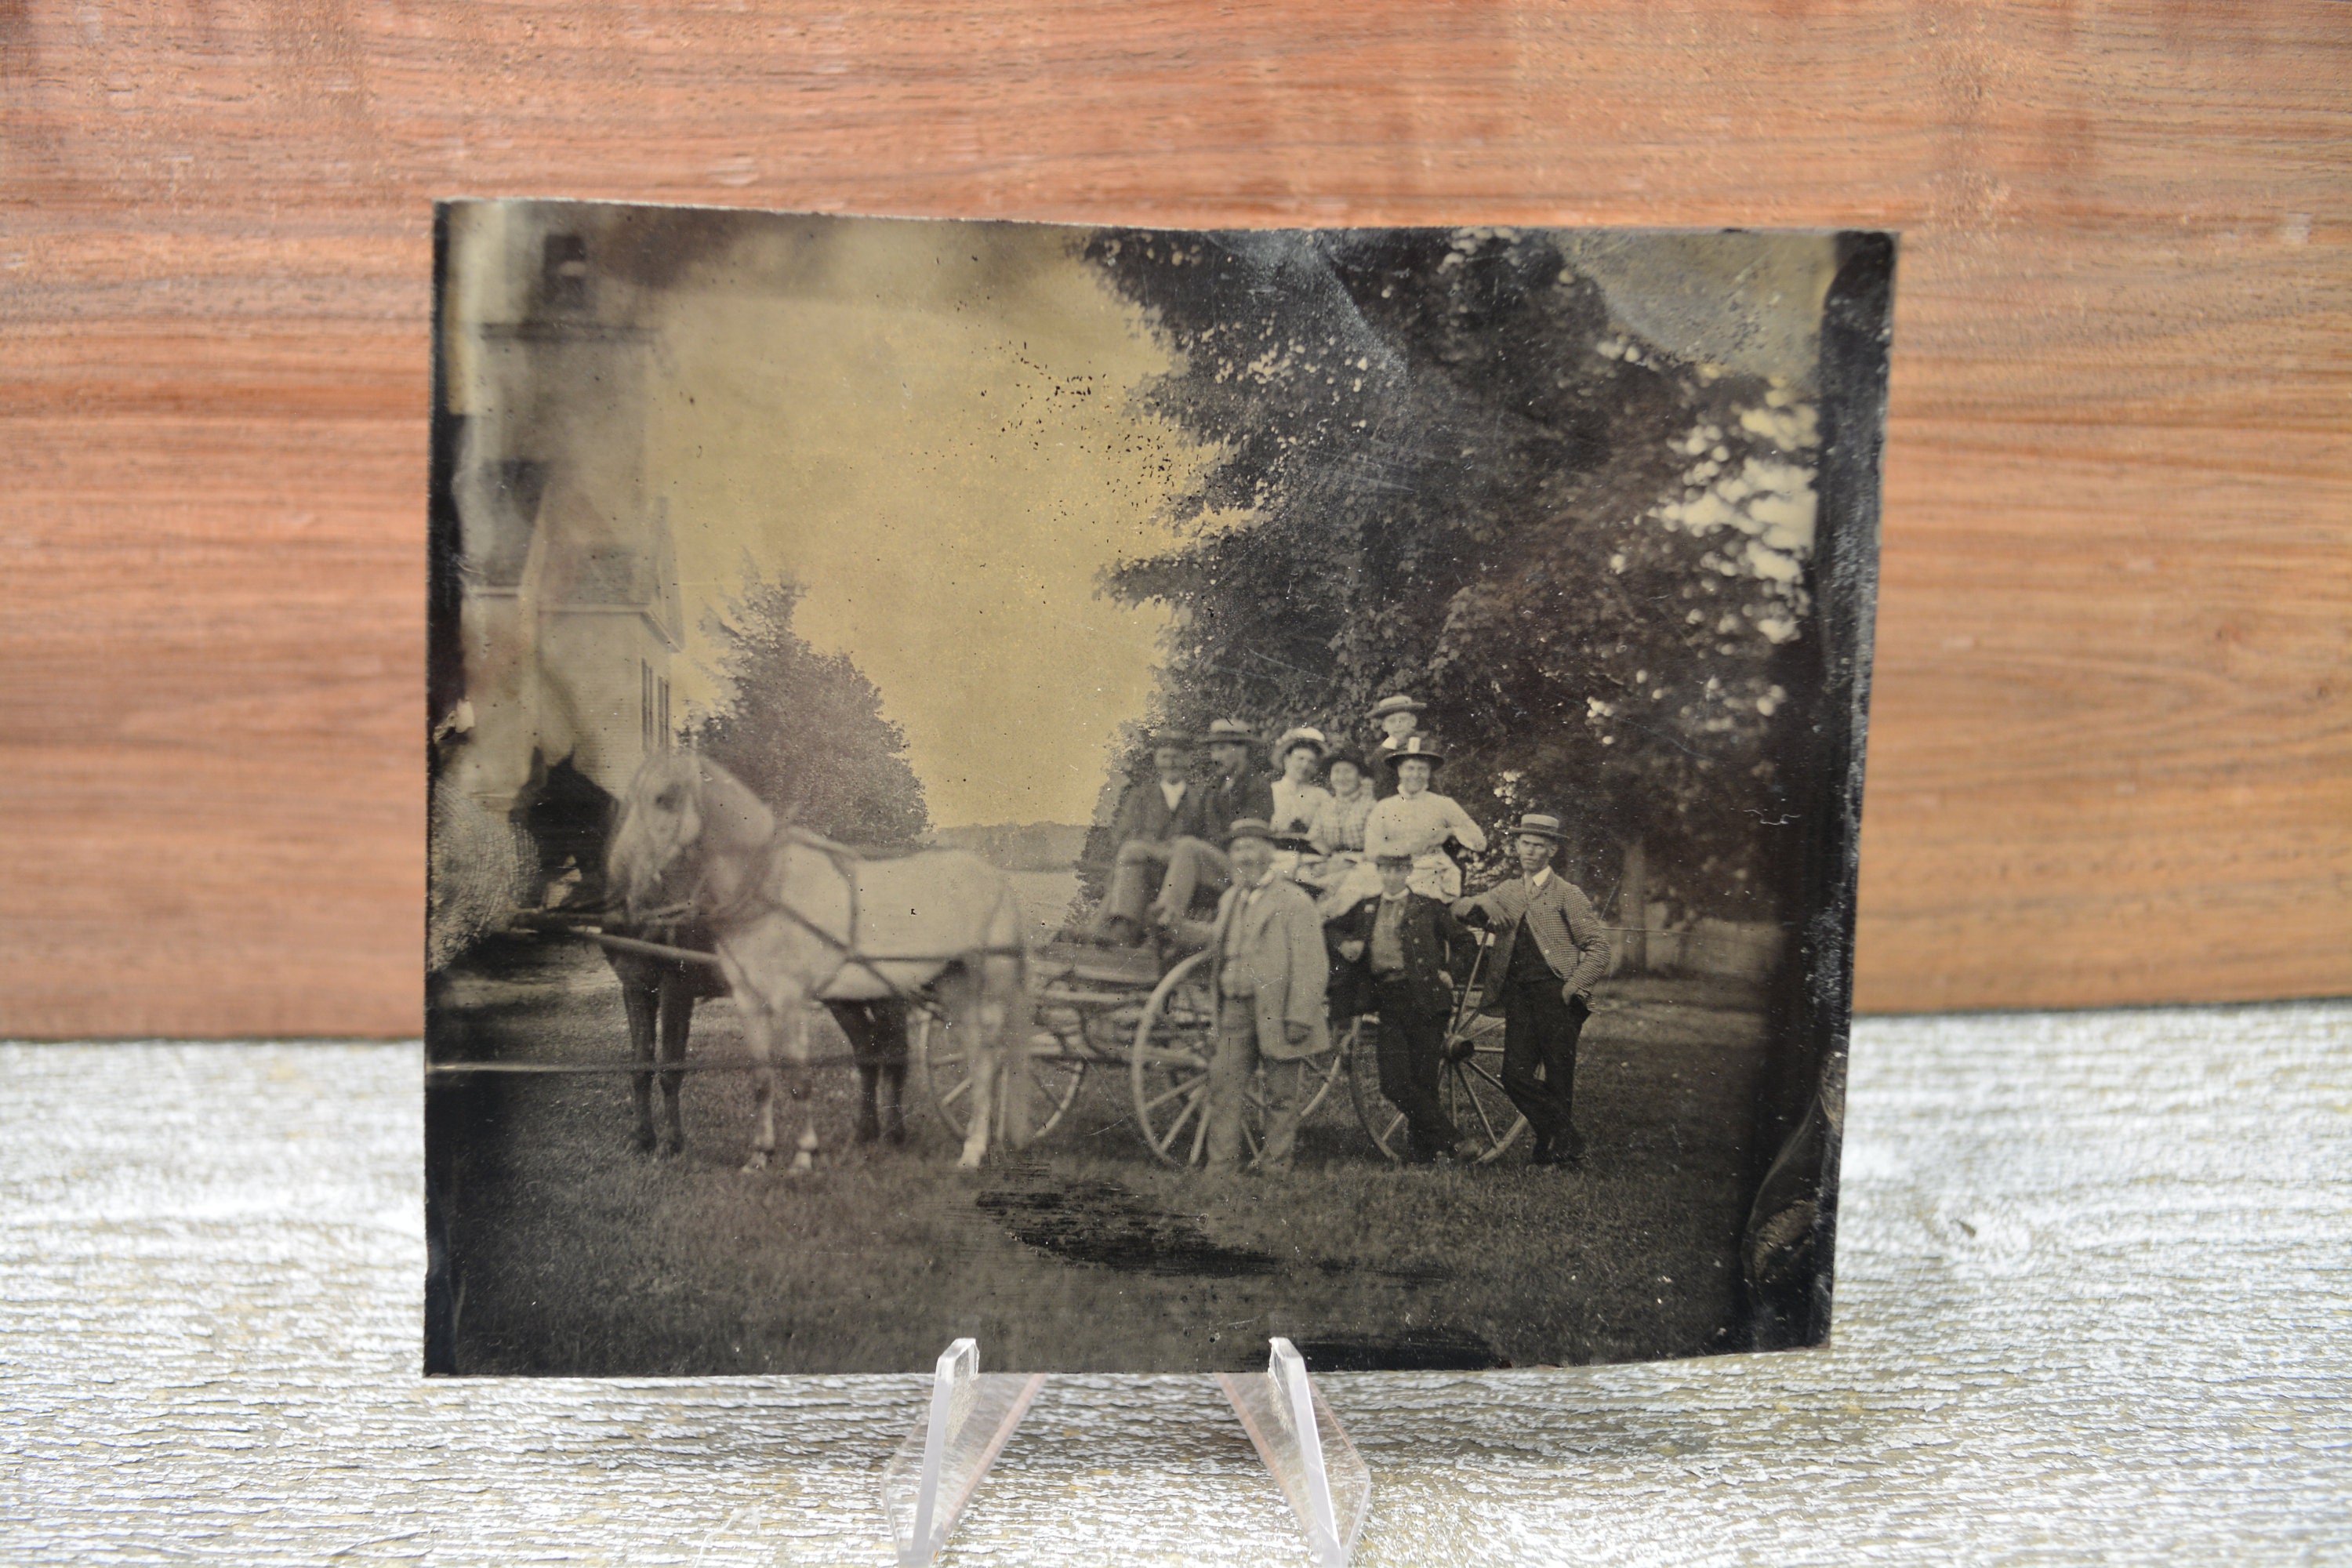 Antique Building Tintype, Vintage Tintype, Tintype Photograph, Late 1800s Early 1900s, Building, Horses, People, Buggy, 4 7/8'' x 4''